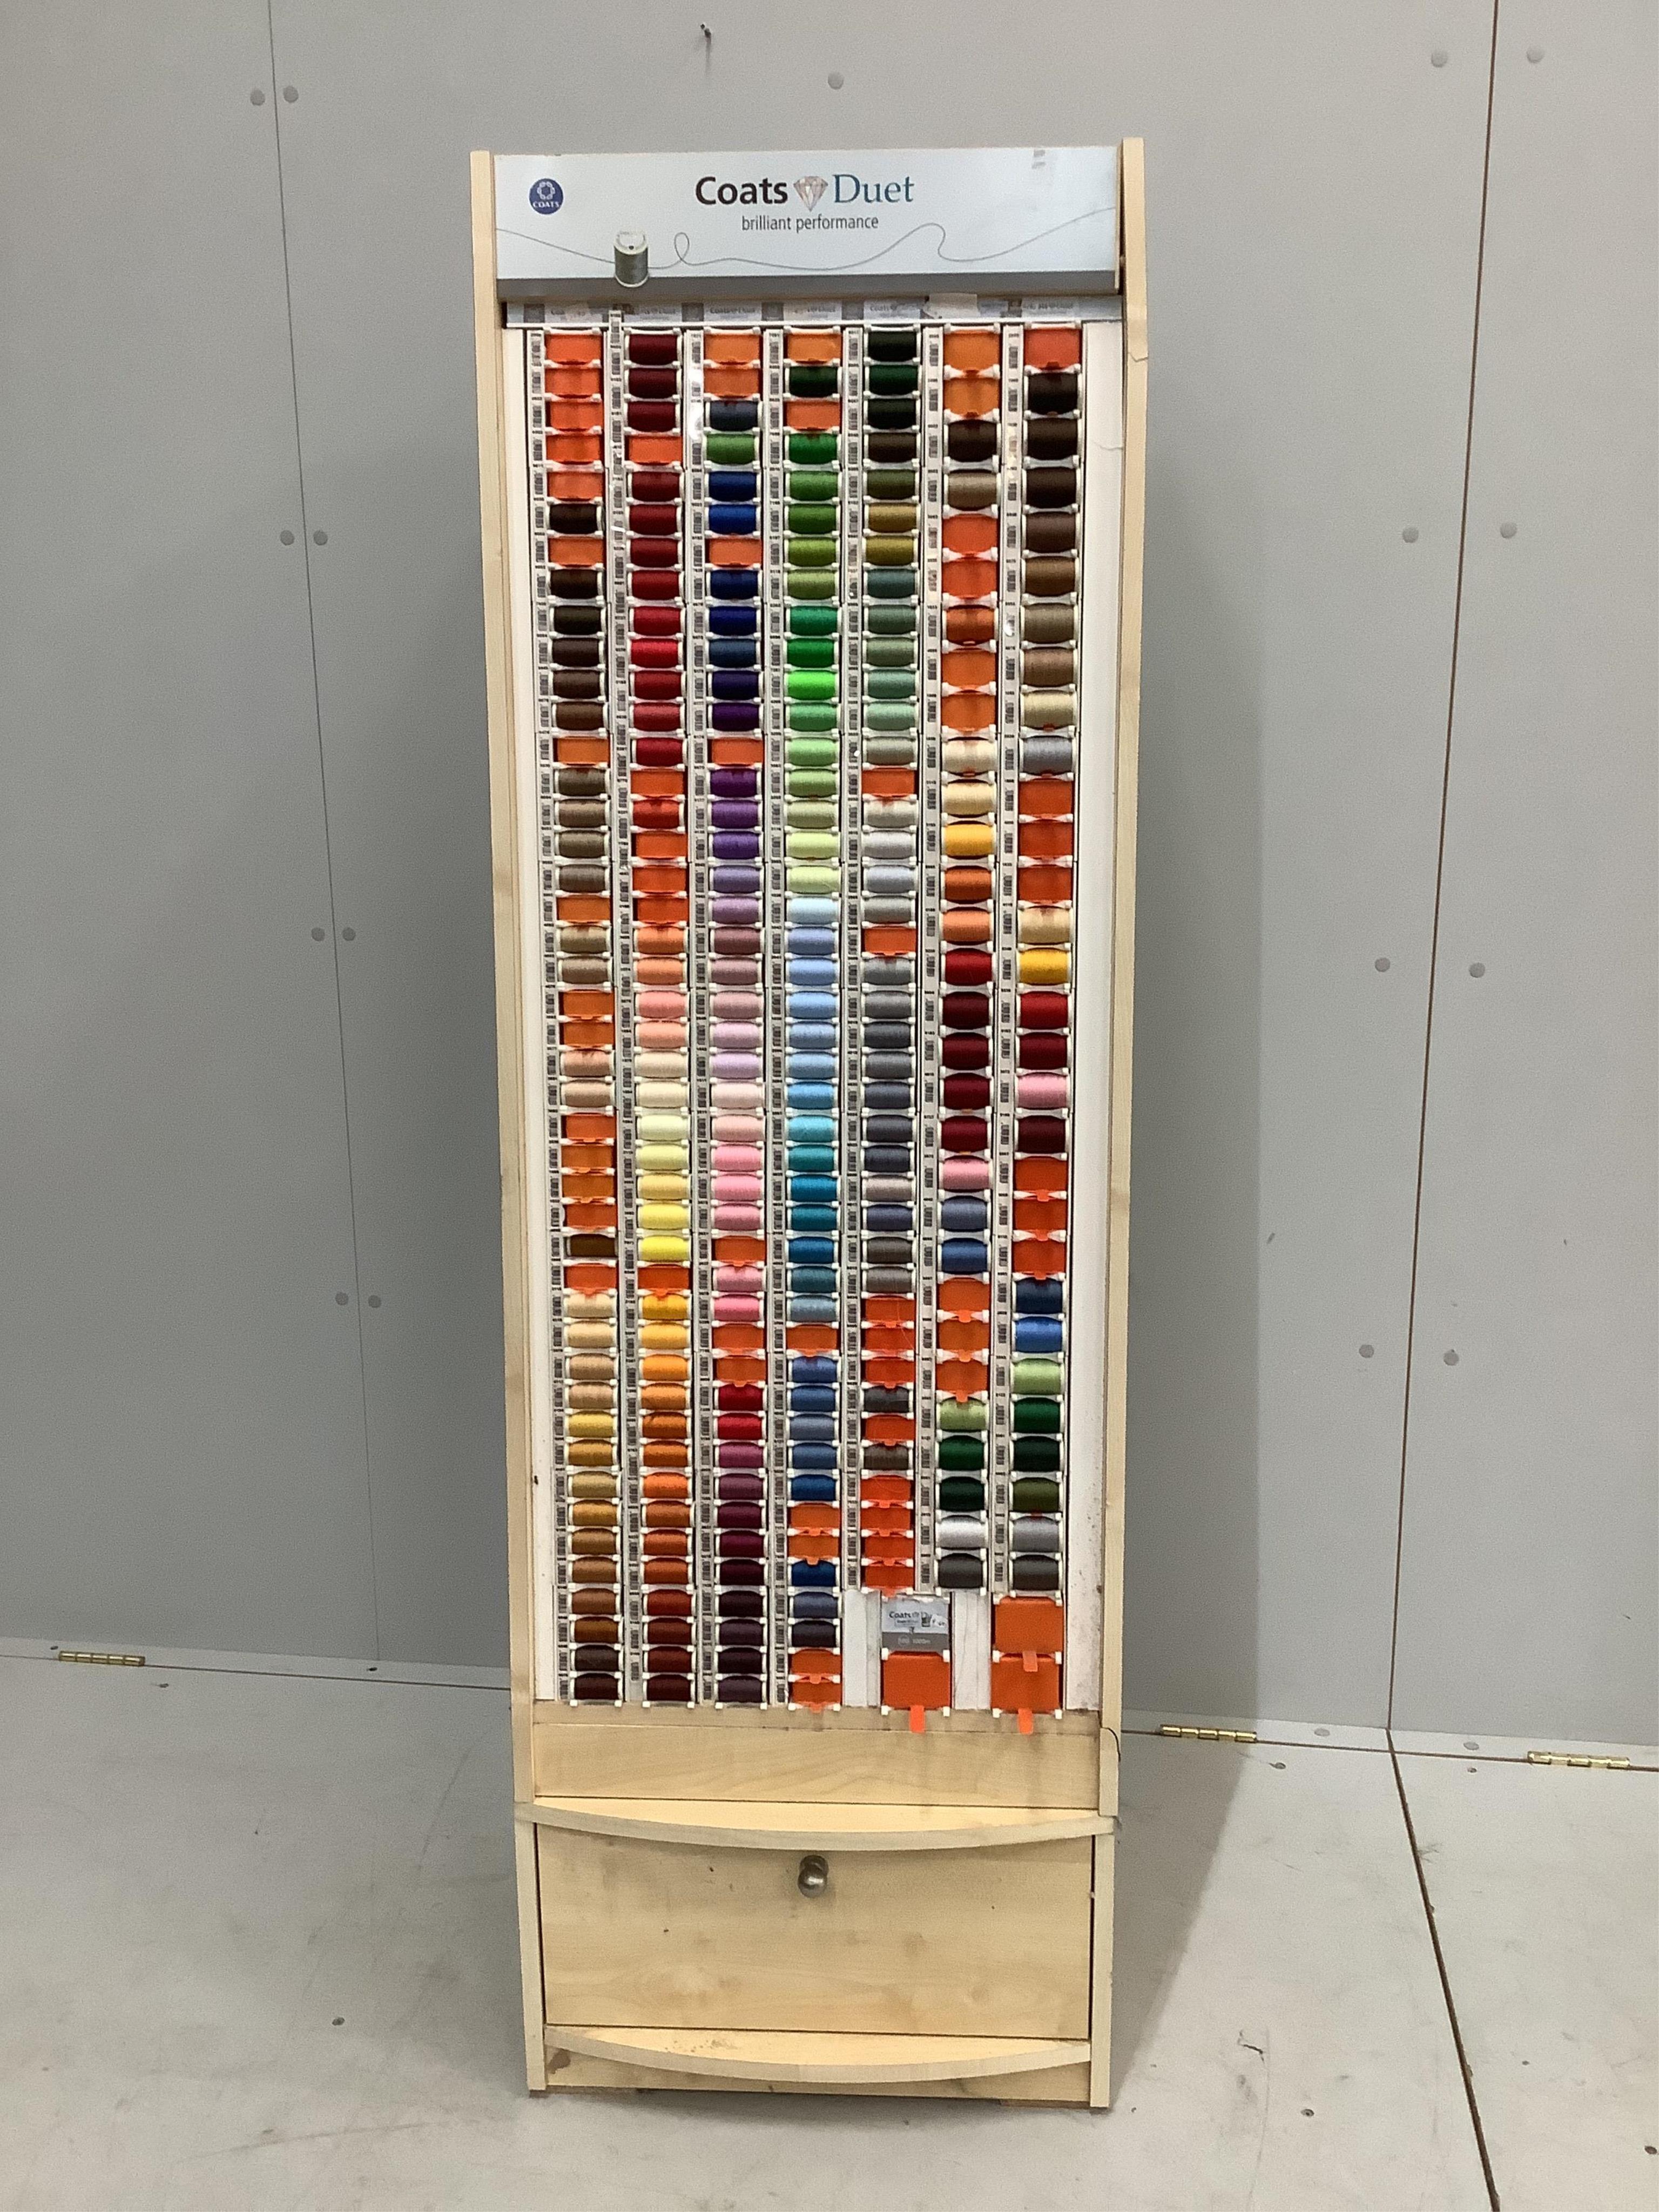 A ‘Coats Duet’ haberdasher's shop thread display unit with a quantity of assorted spools, width 51cm, depth 40cm, height 162cm. Condition - good